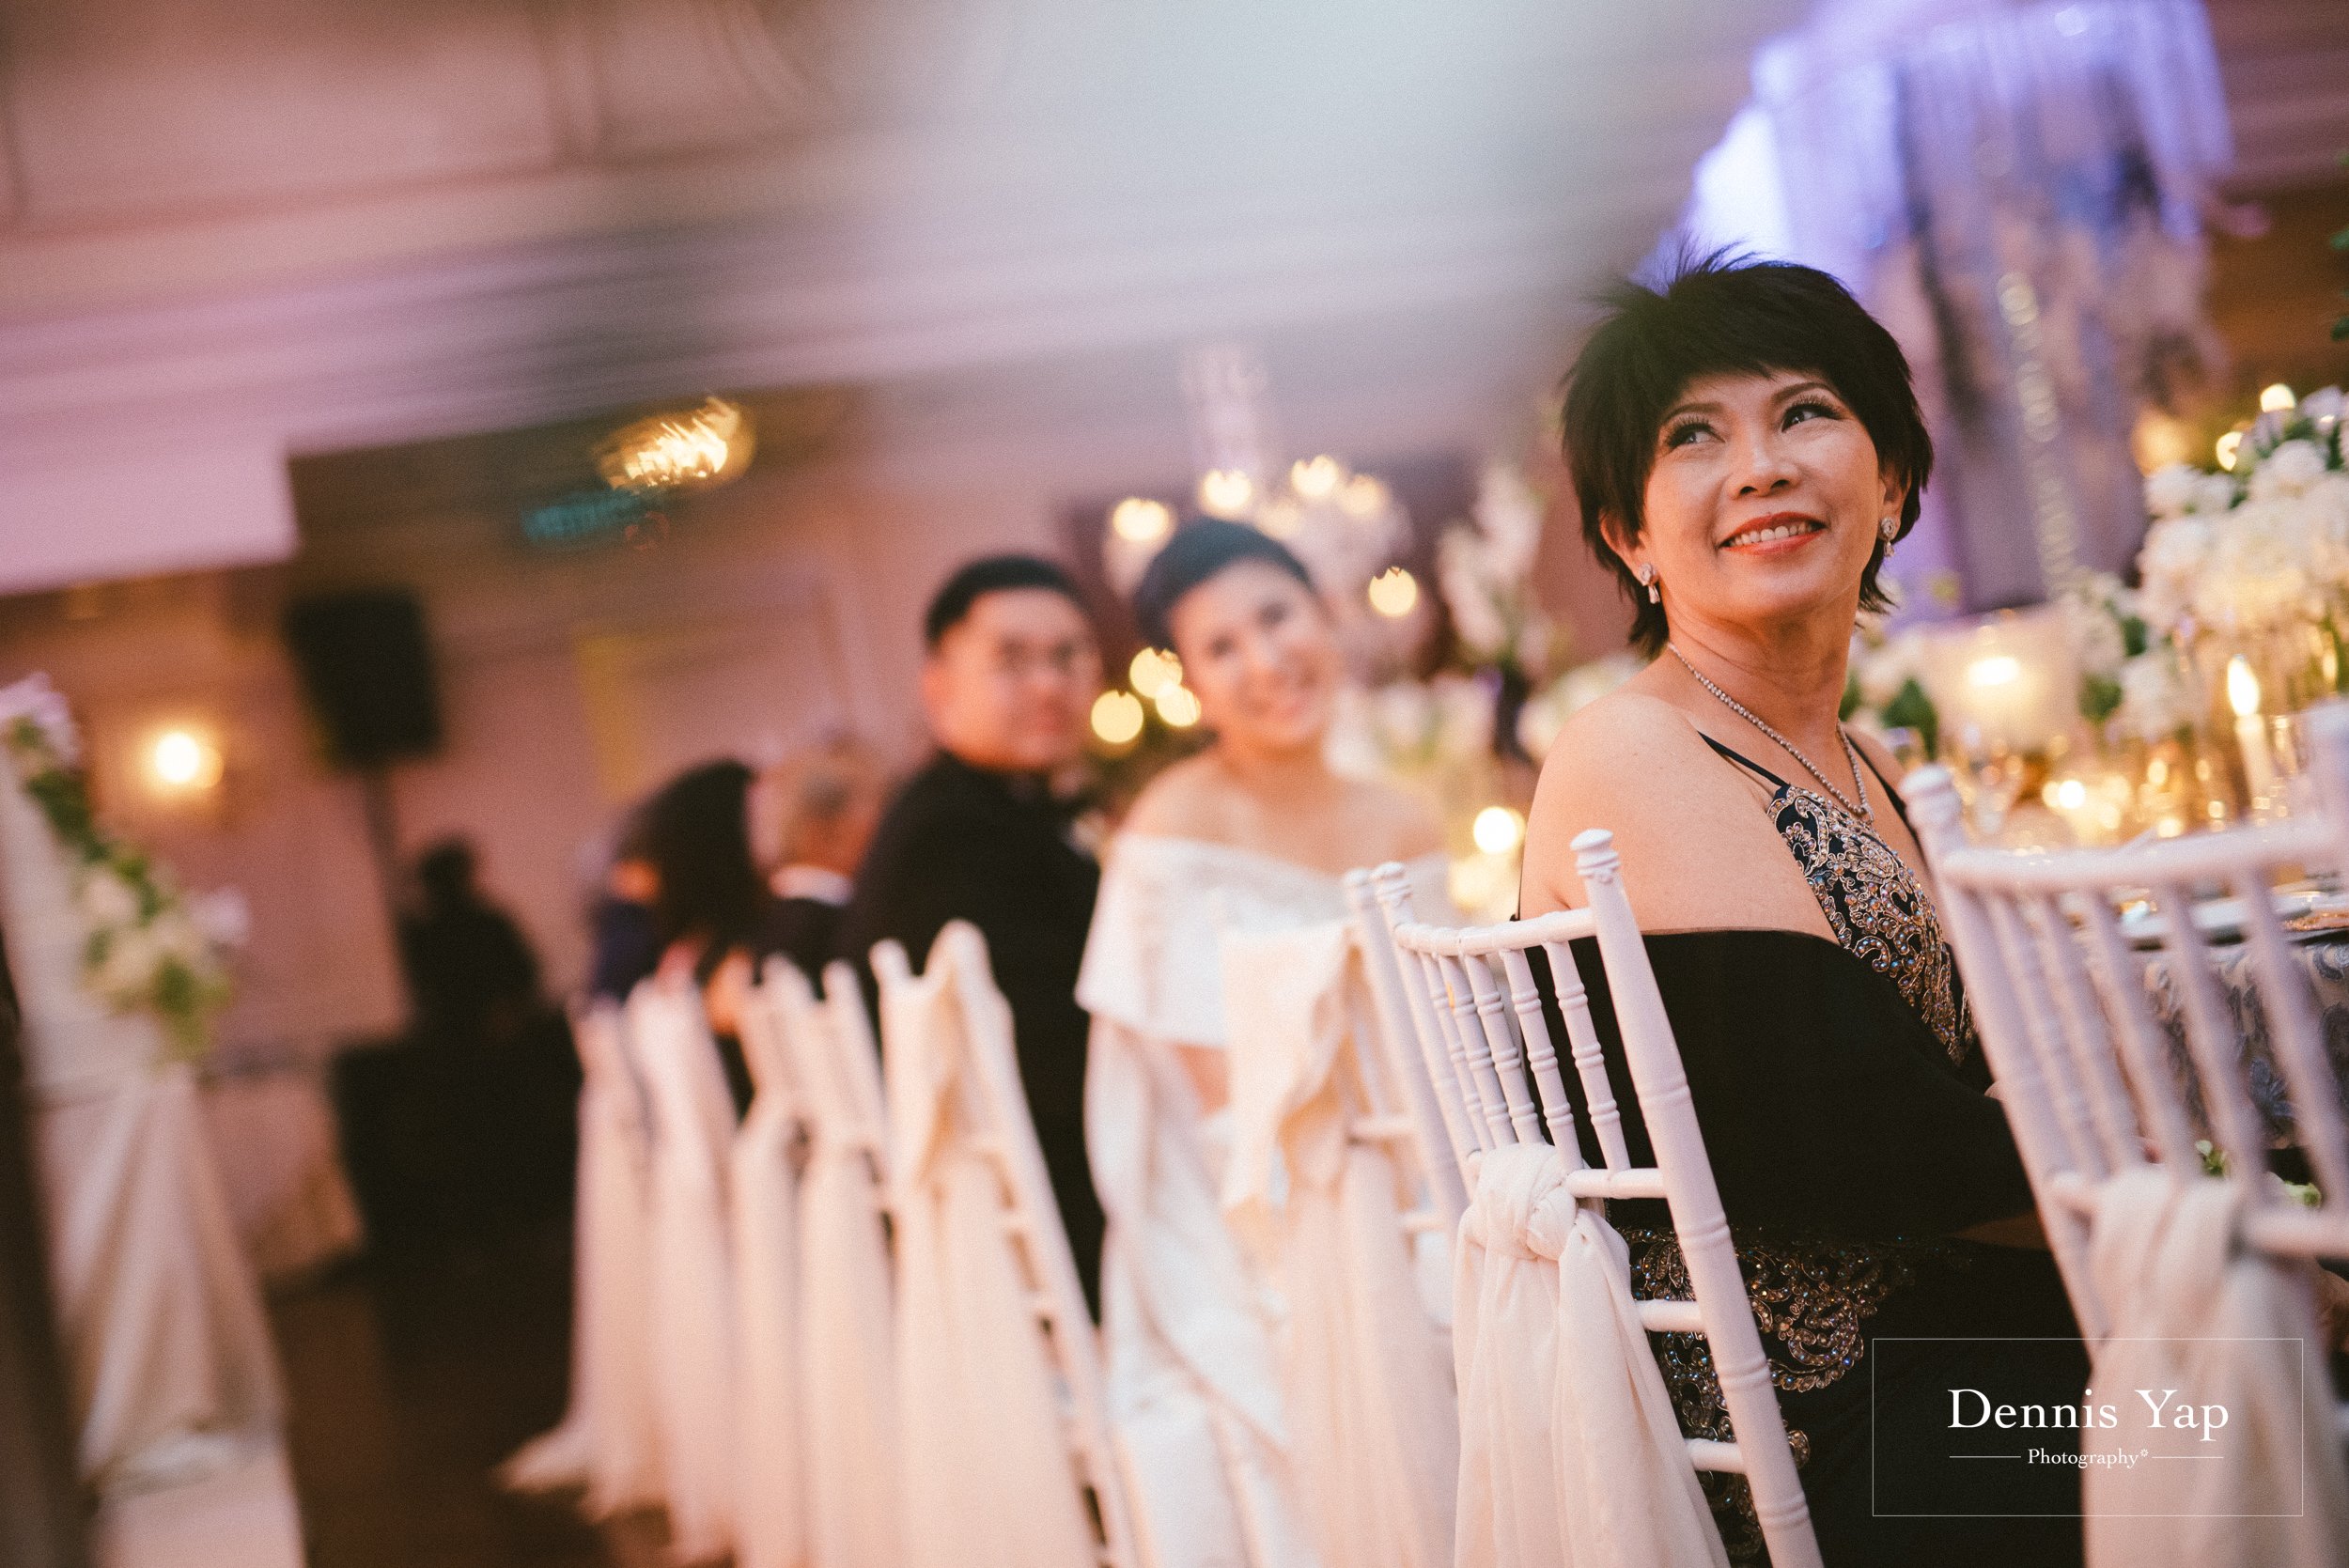 beng seong caring E and O hotel the occasion wedding planner awesome decoration dennis yap photography malaysia top wedding photographer-12.jpg